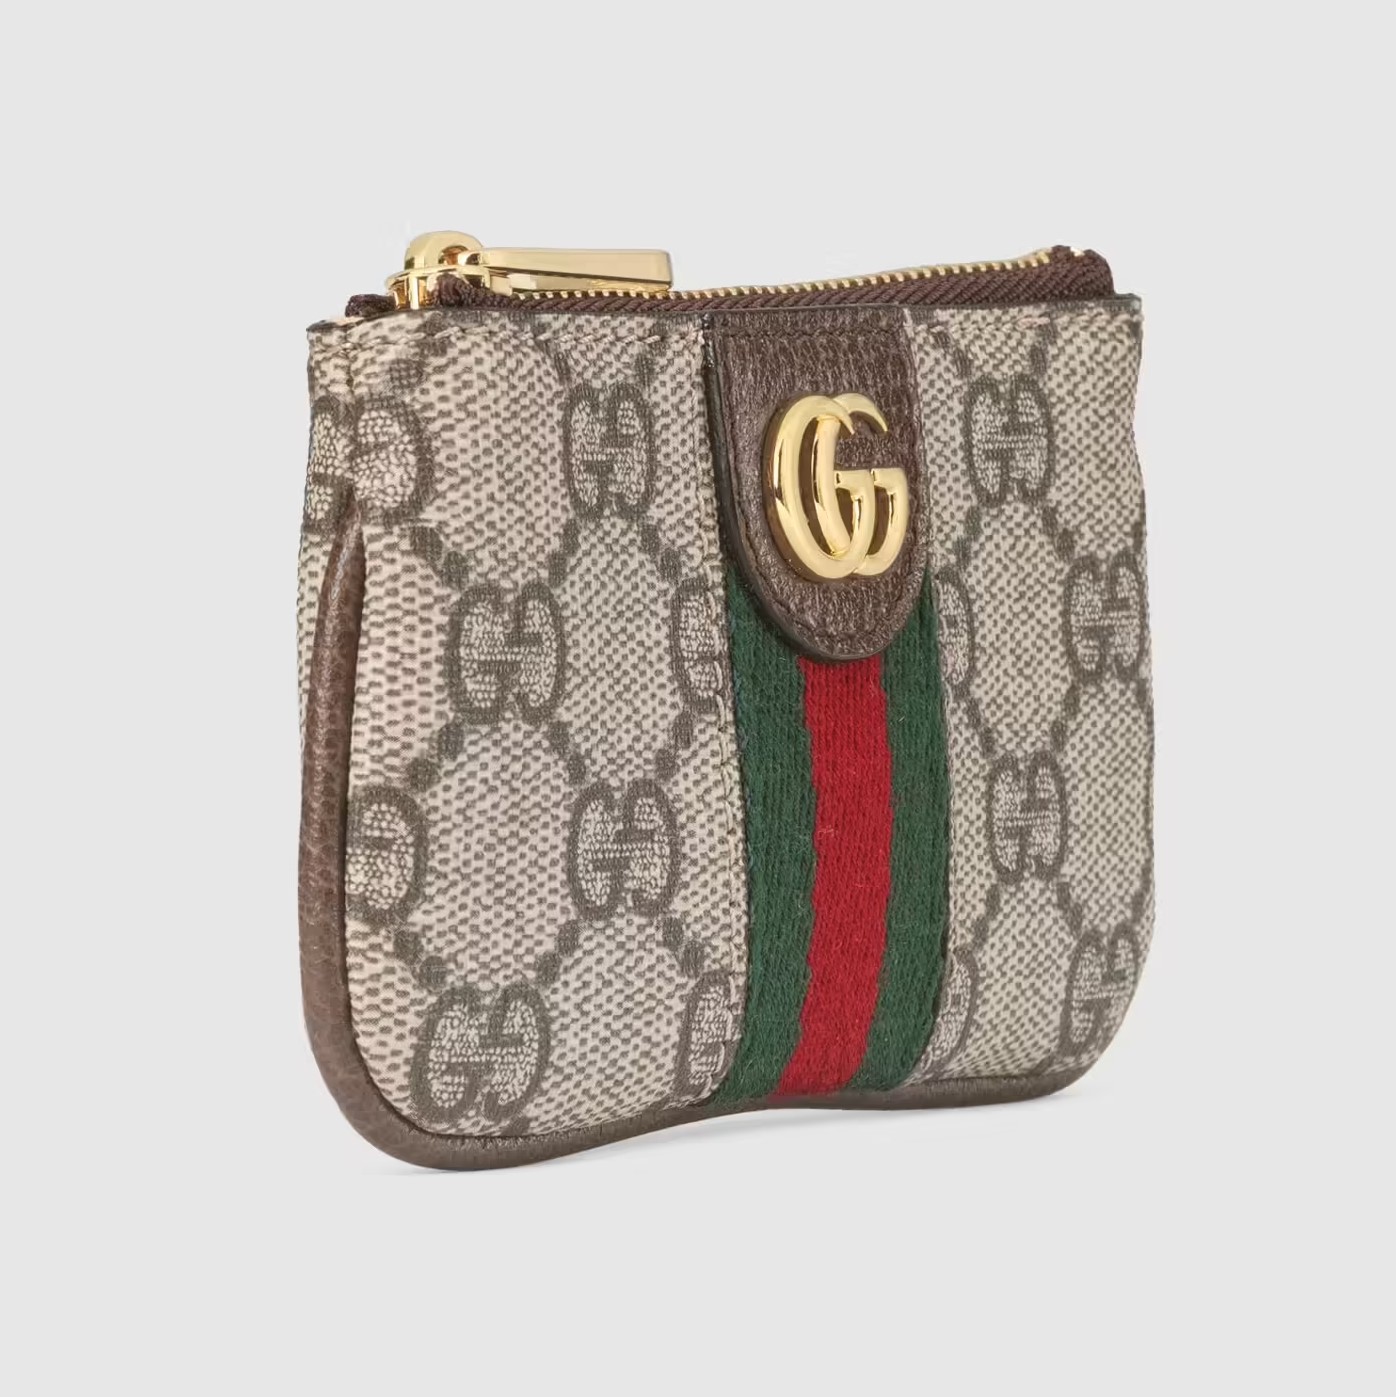 VÍ GUCCI MINI LIGHT OPHIDIA KEY CASE IN BEIGE AND EBONY GG SUPREME CANVAS 6